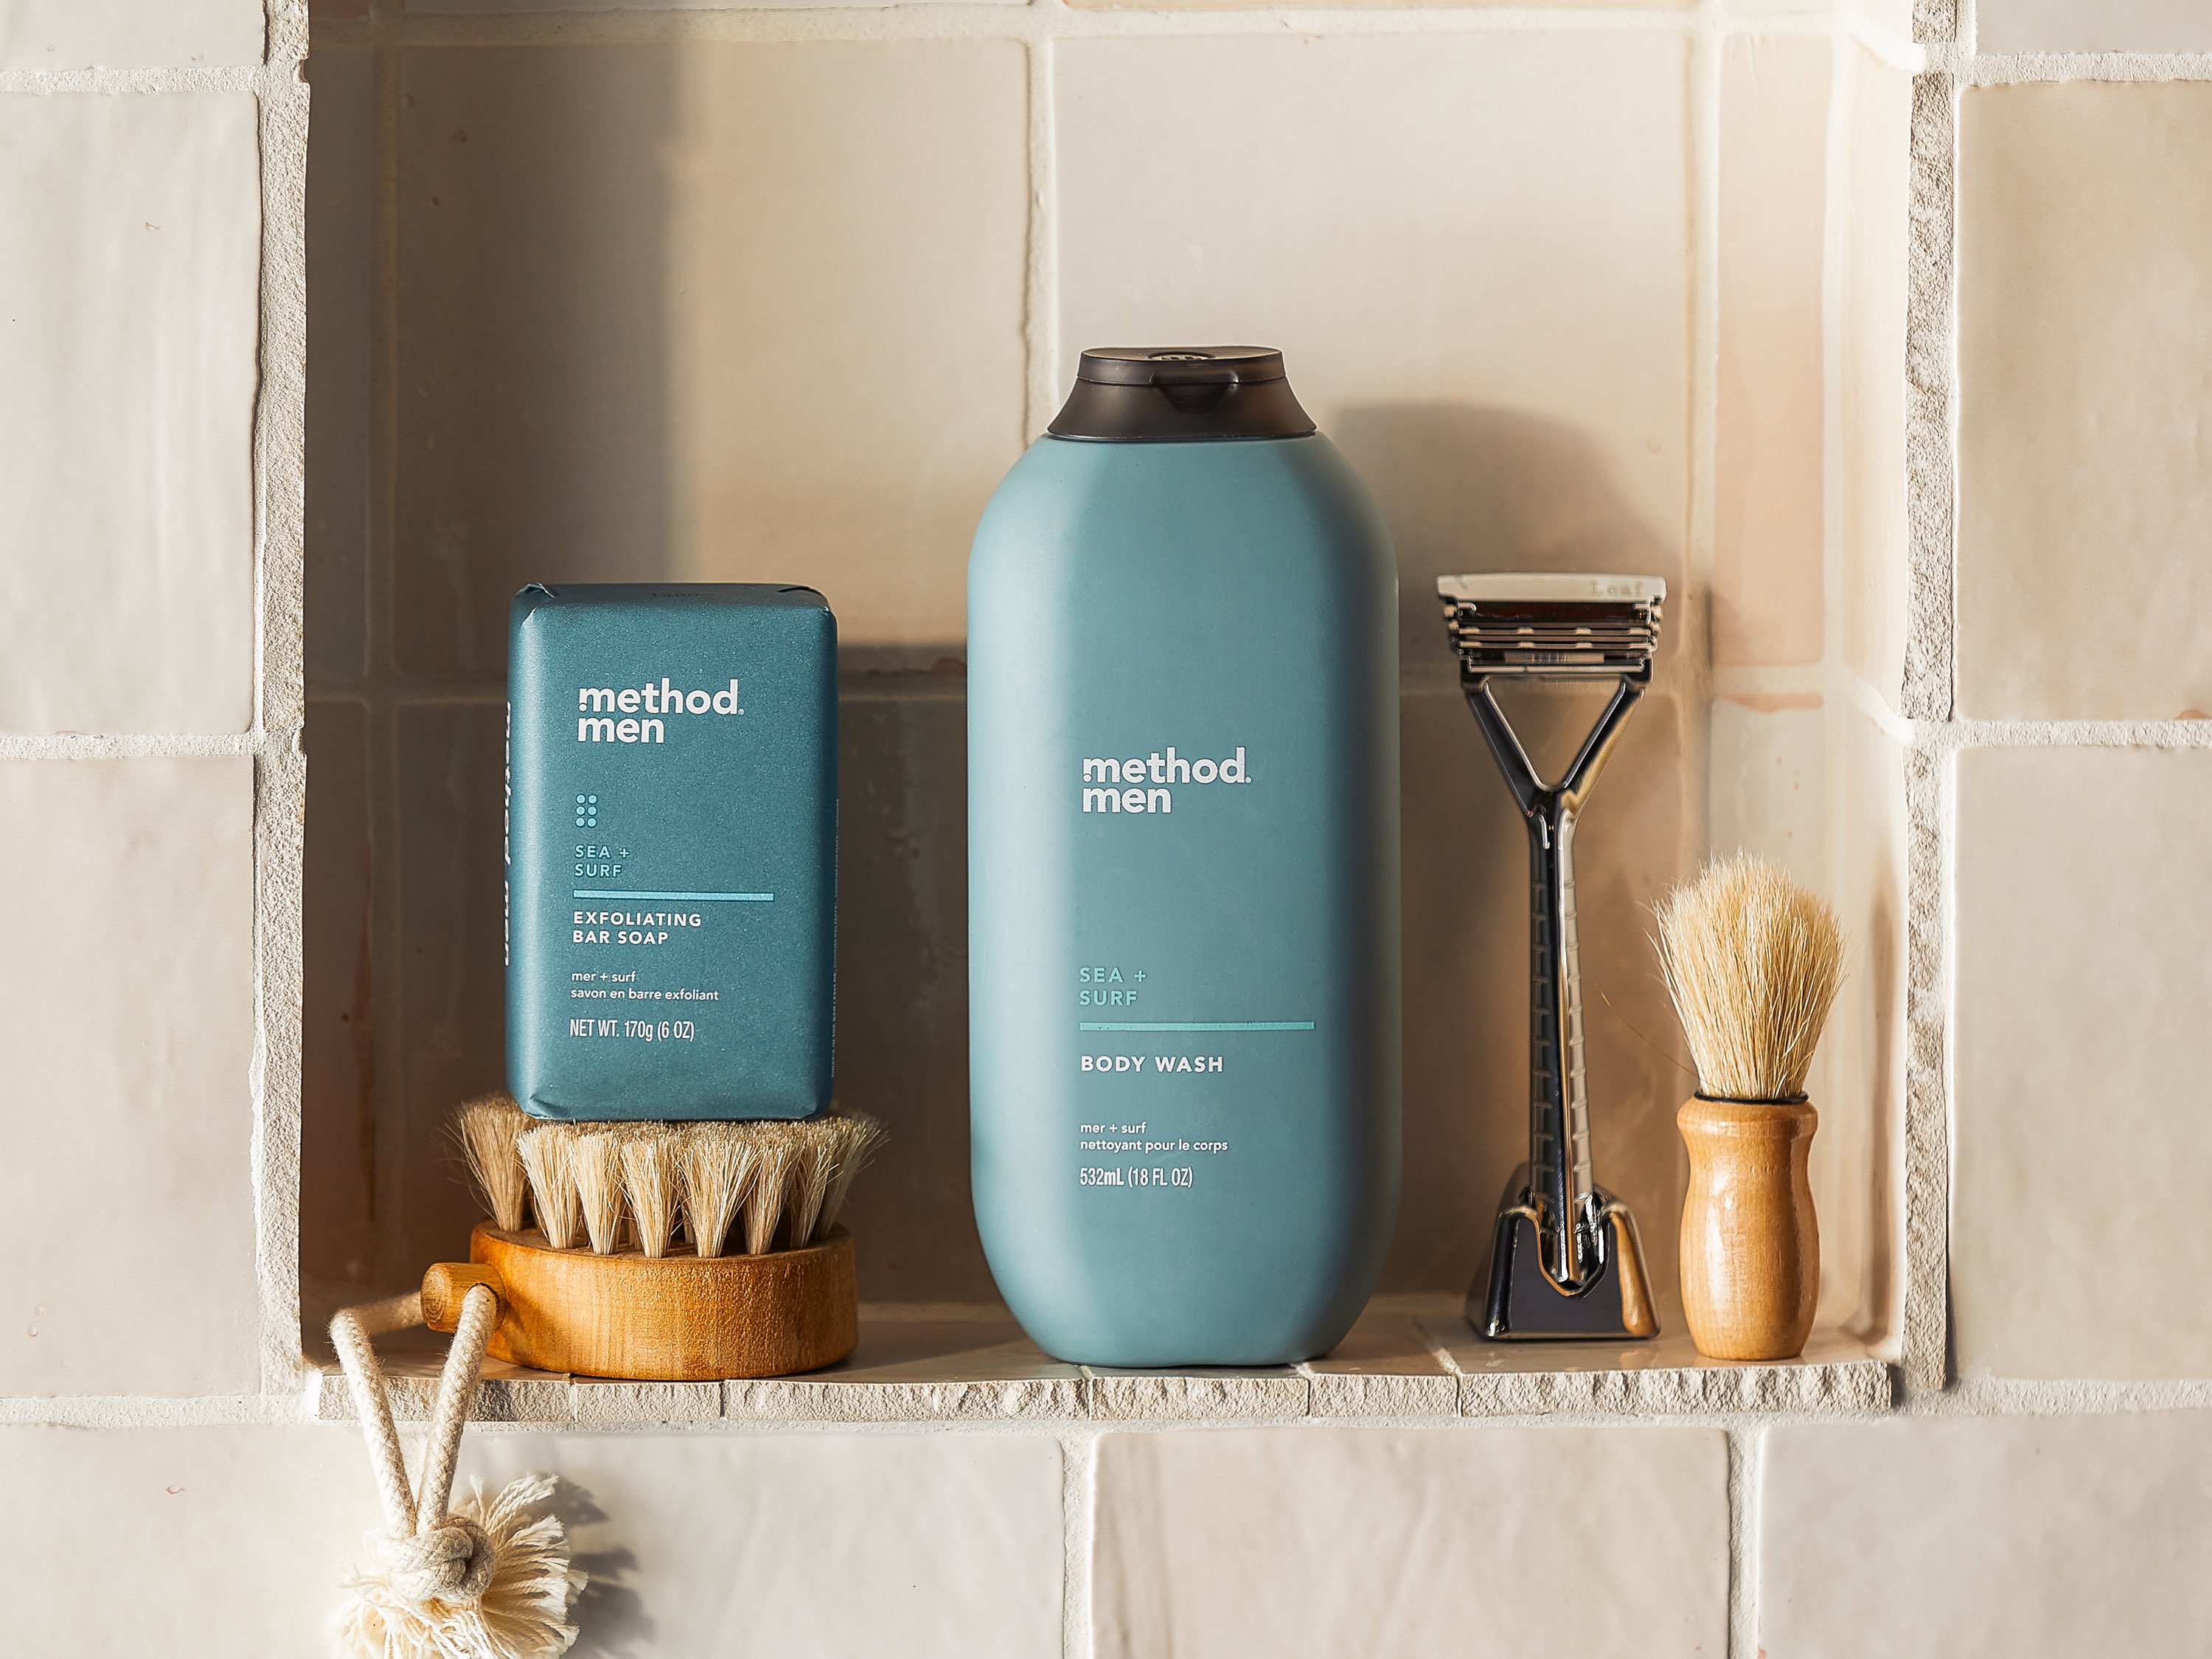 method products in a bathroom